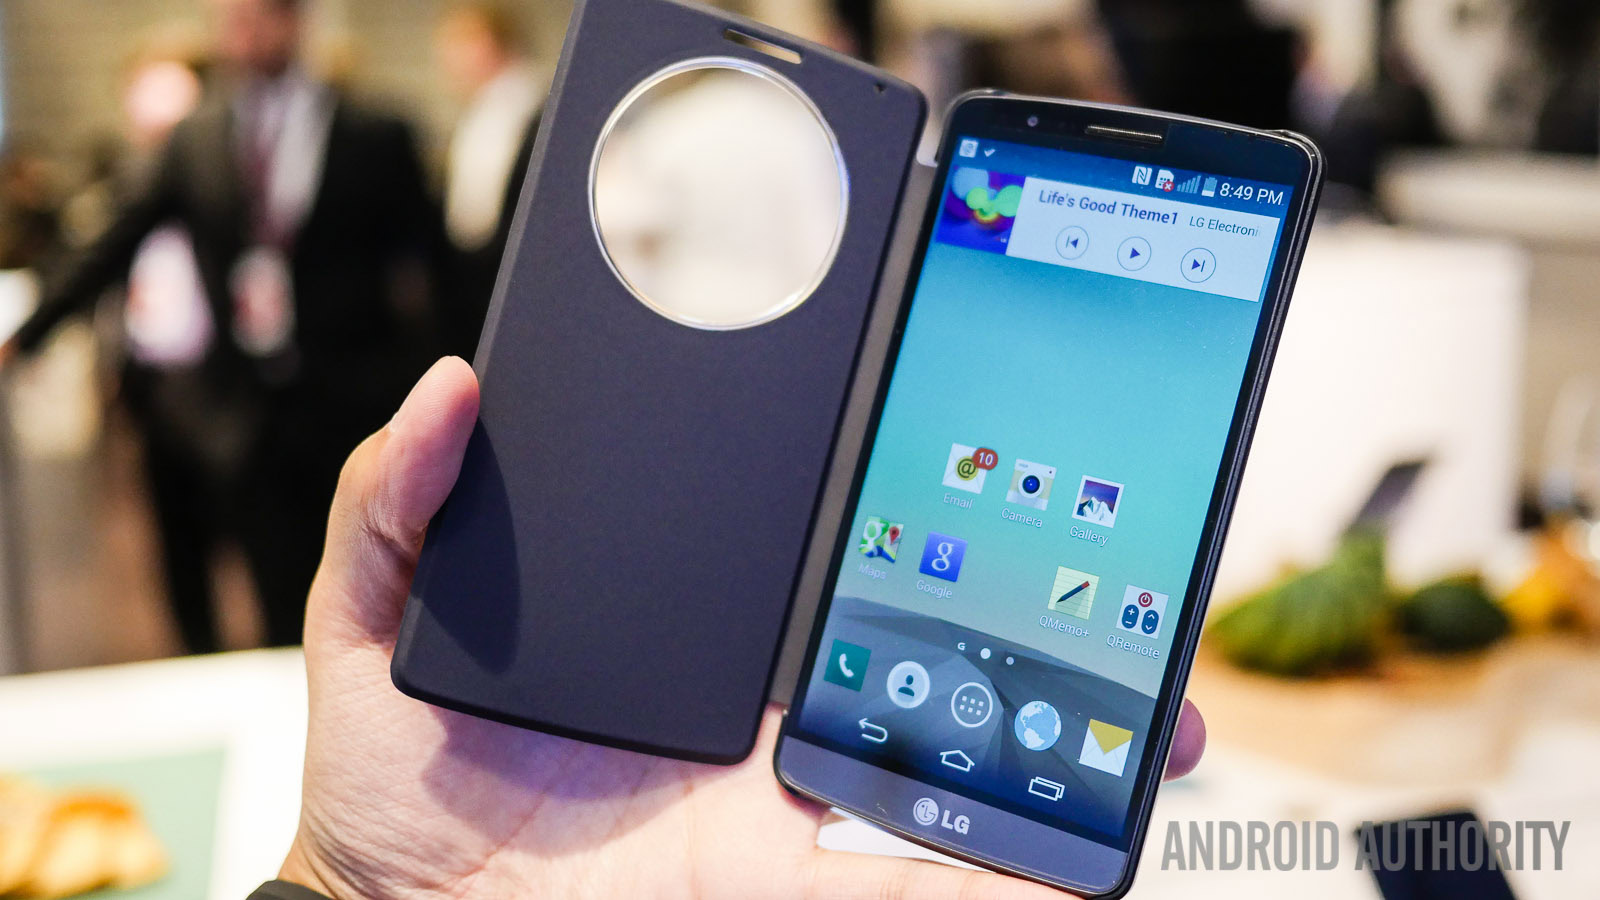 LG G3 review: hands-on